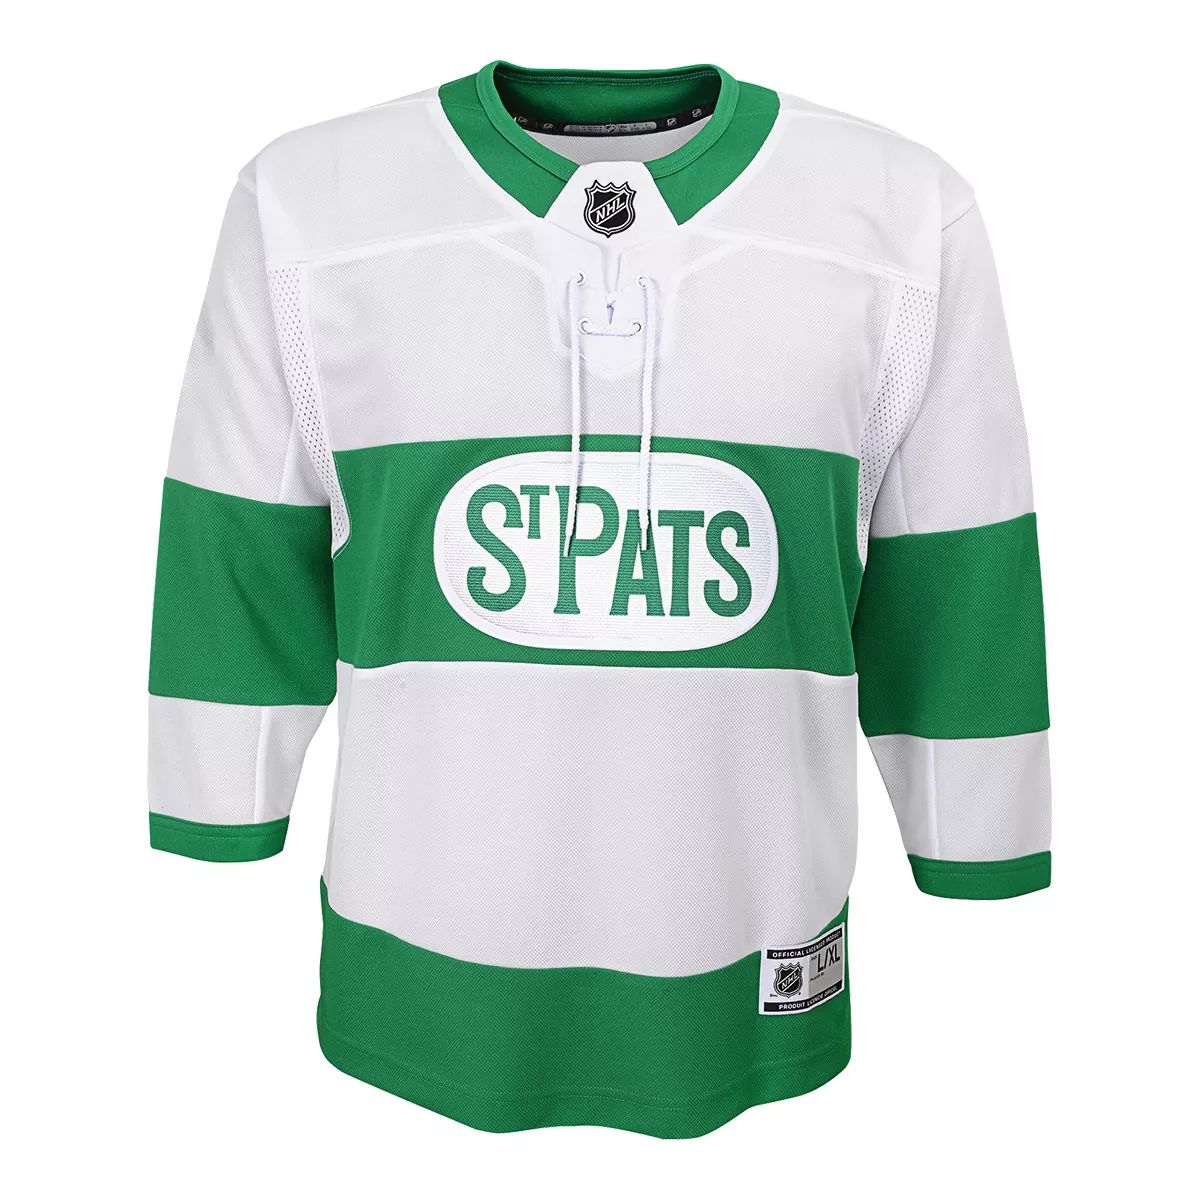 Covers on X: The Maple Leafs St. Pats practice jerseys go HARD